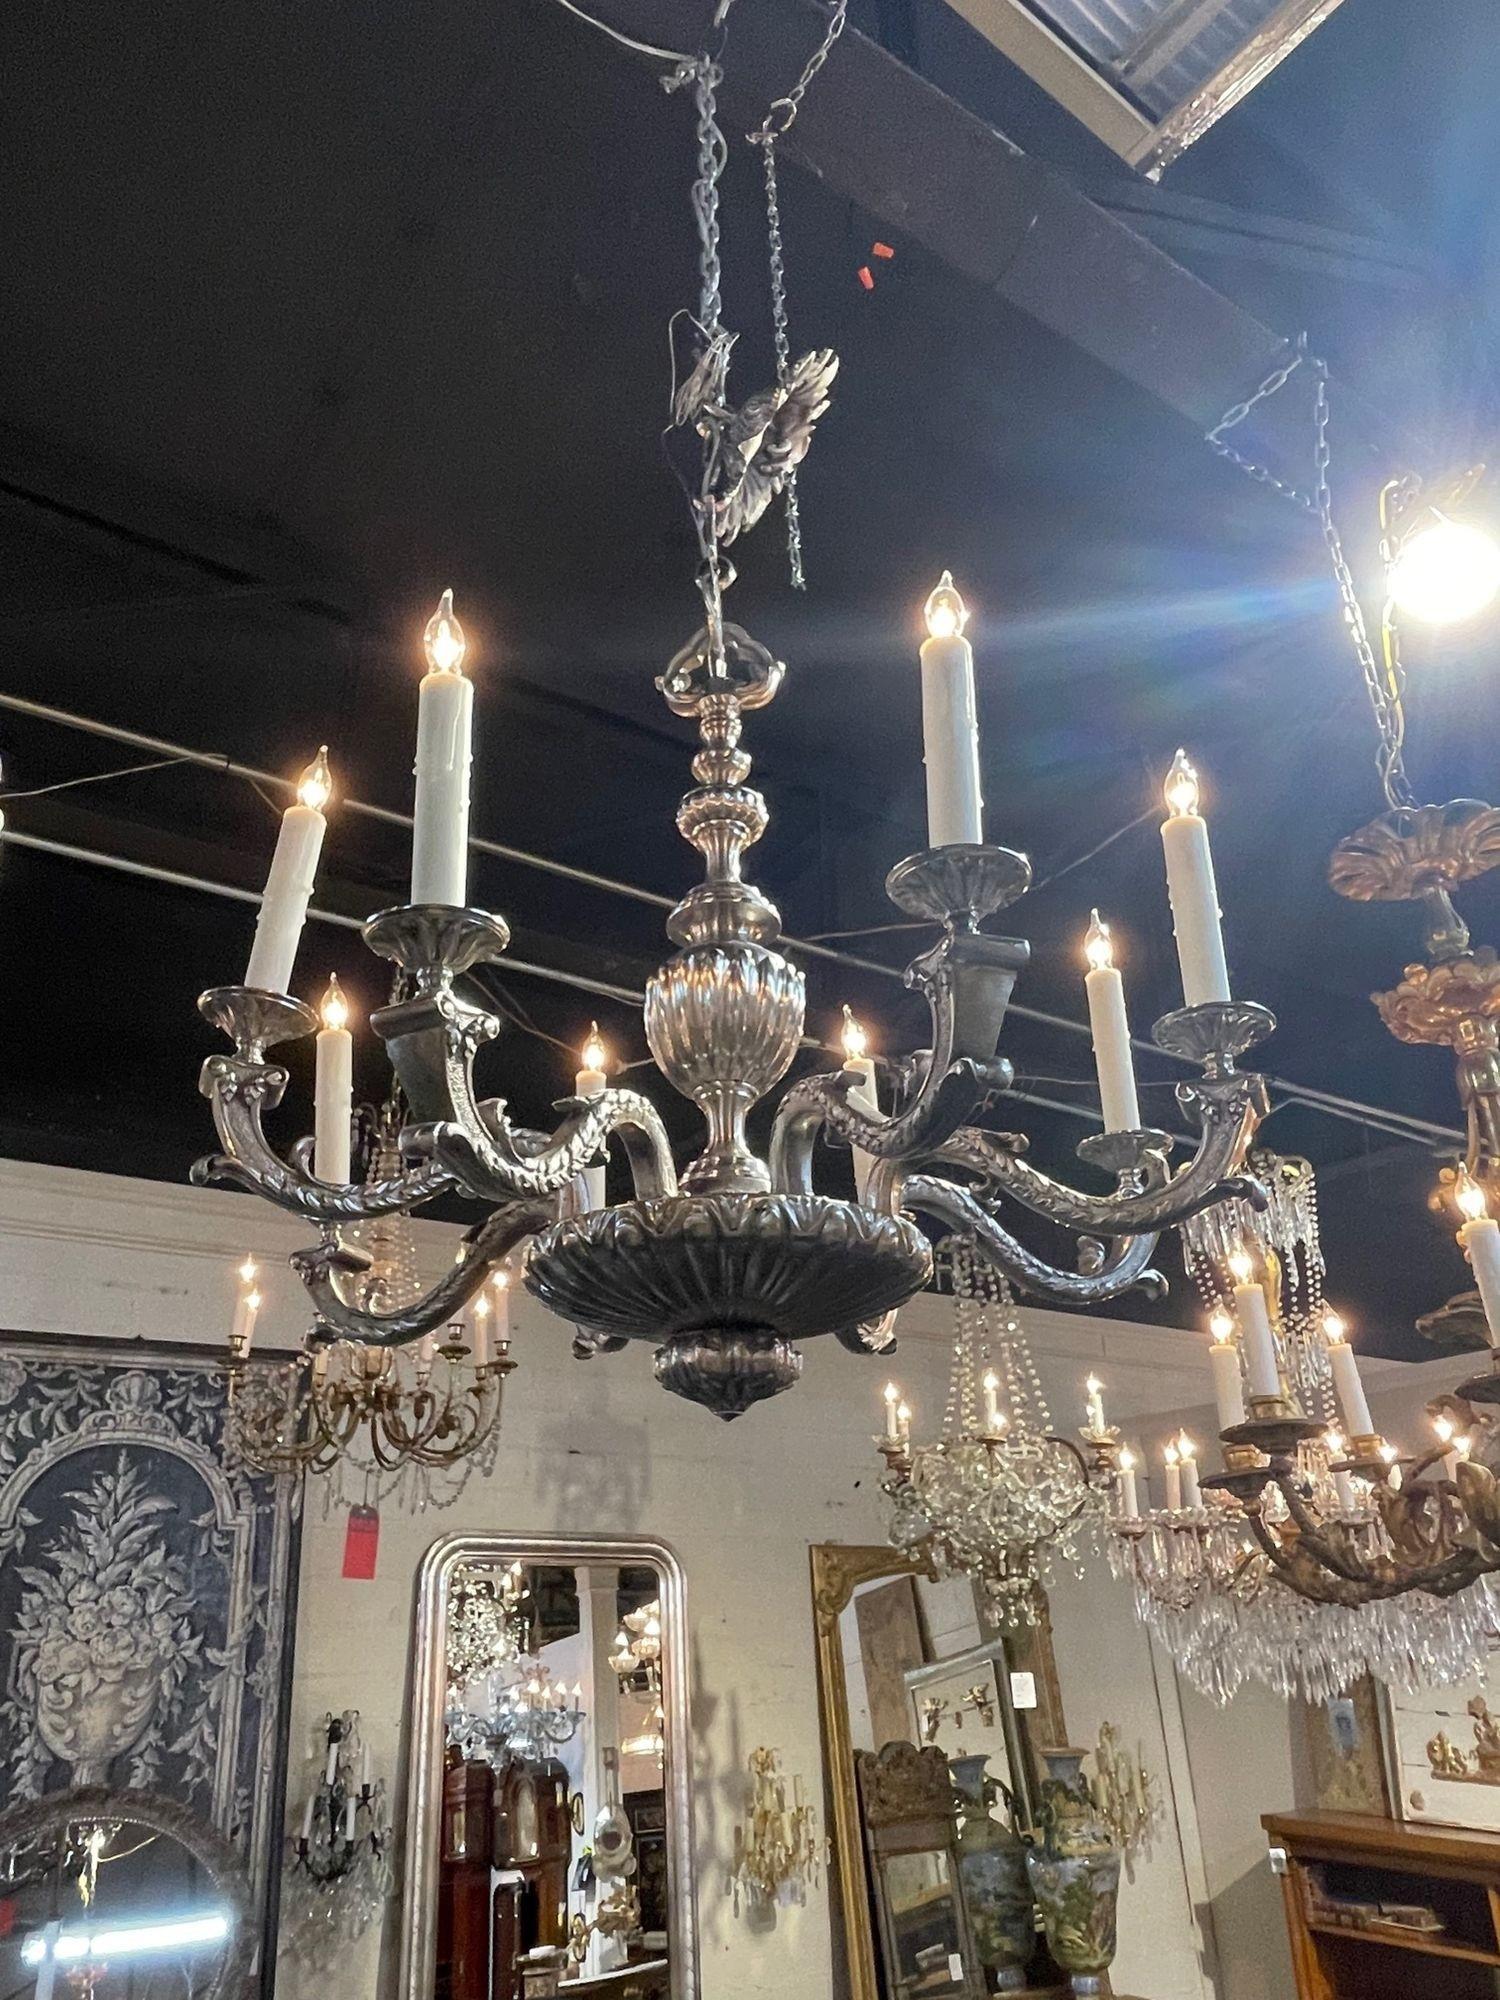 Exceptional 19th century English silvered bronze chandelier with 8 lights. Gorgeous scale and shape to this piece. A traditional beauty for a fine home!